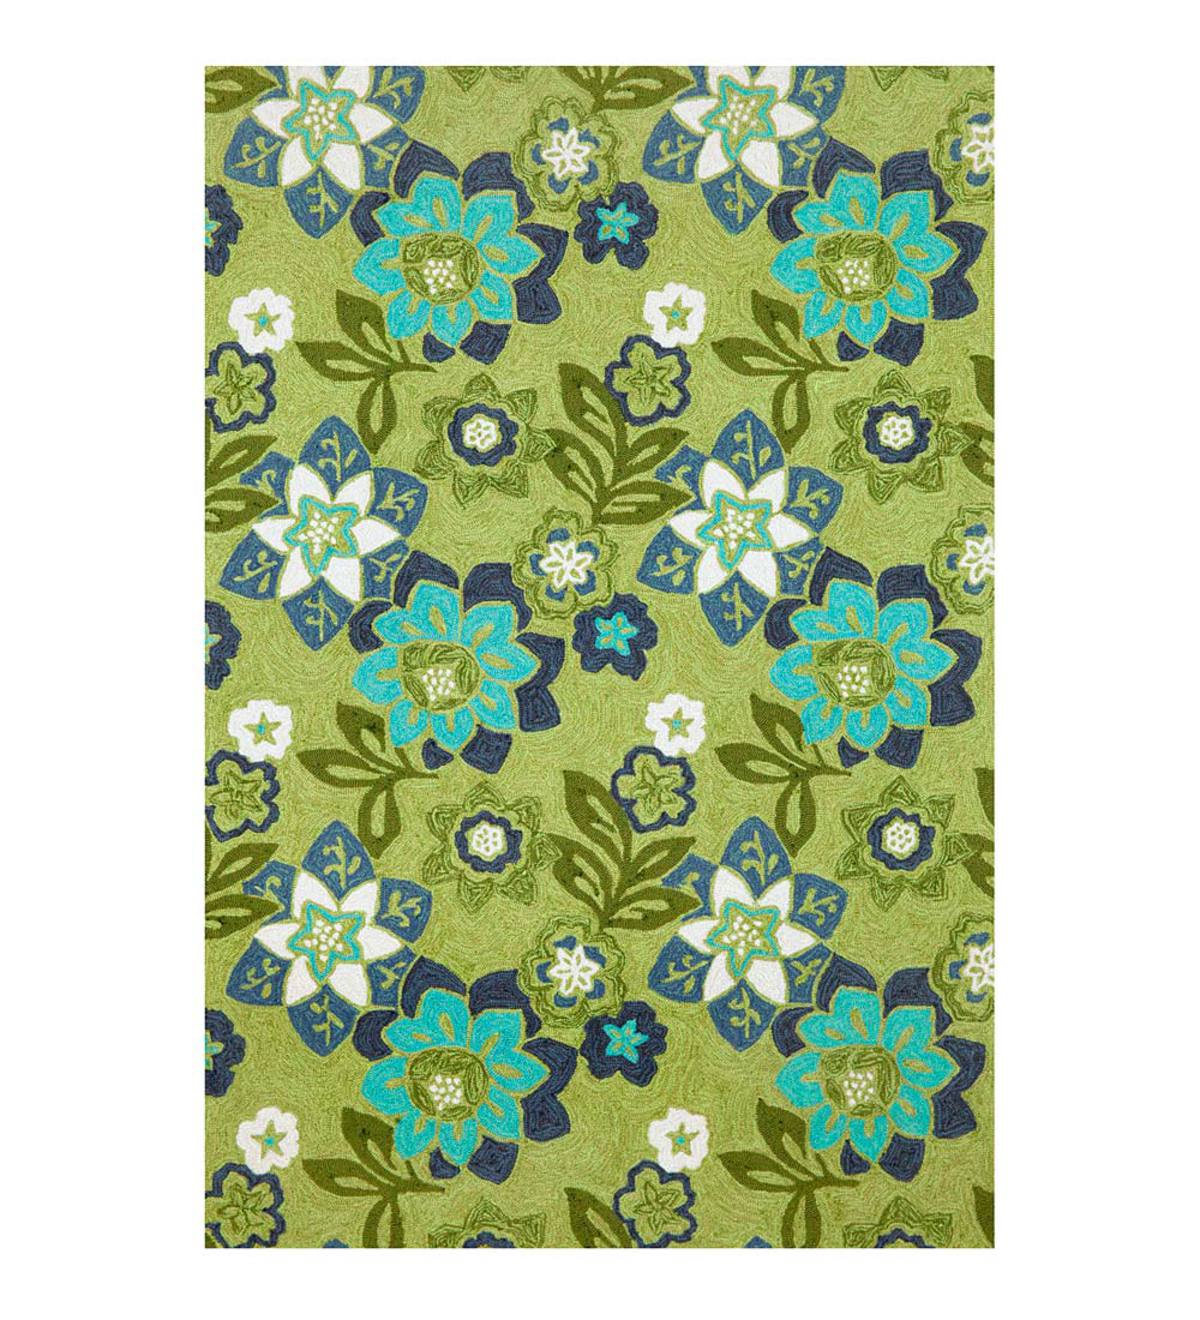 Blue and Green Floral Accent Rug, 7'6"W x 9'6"L - Green